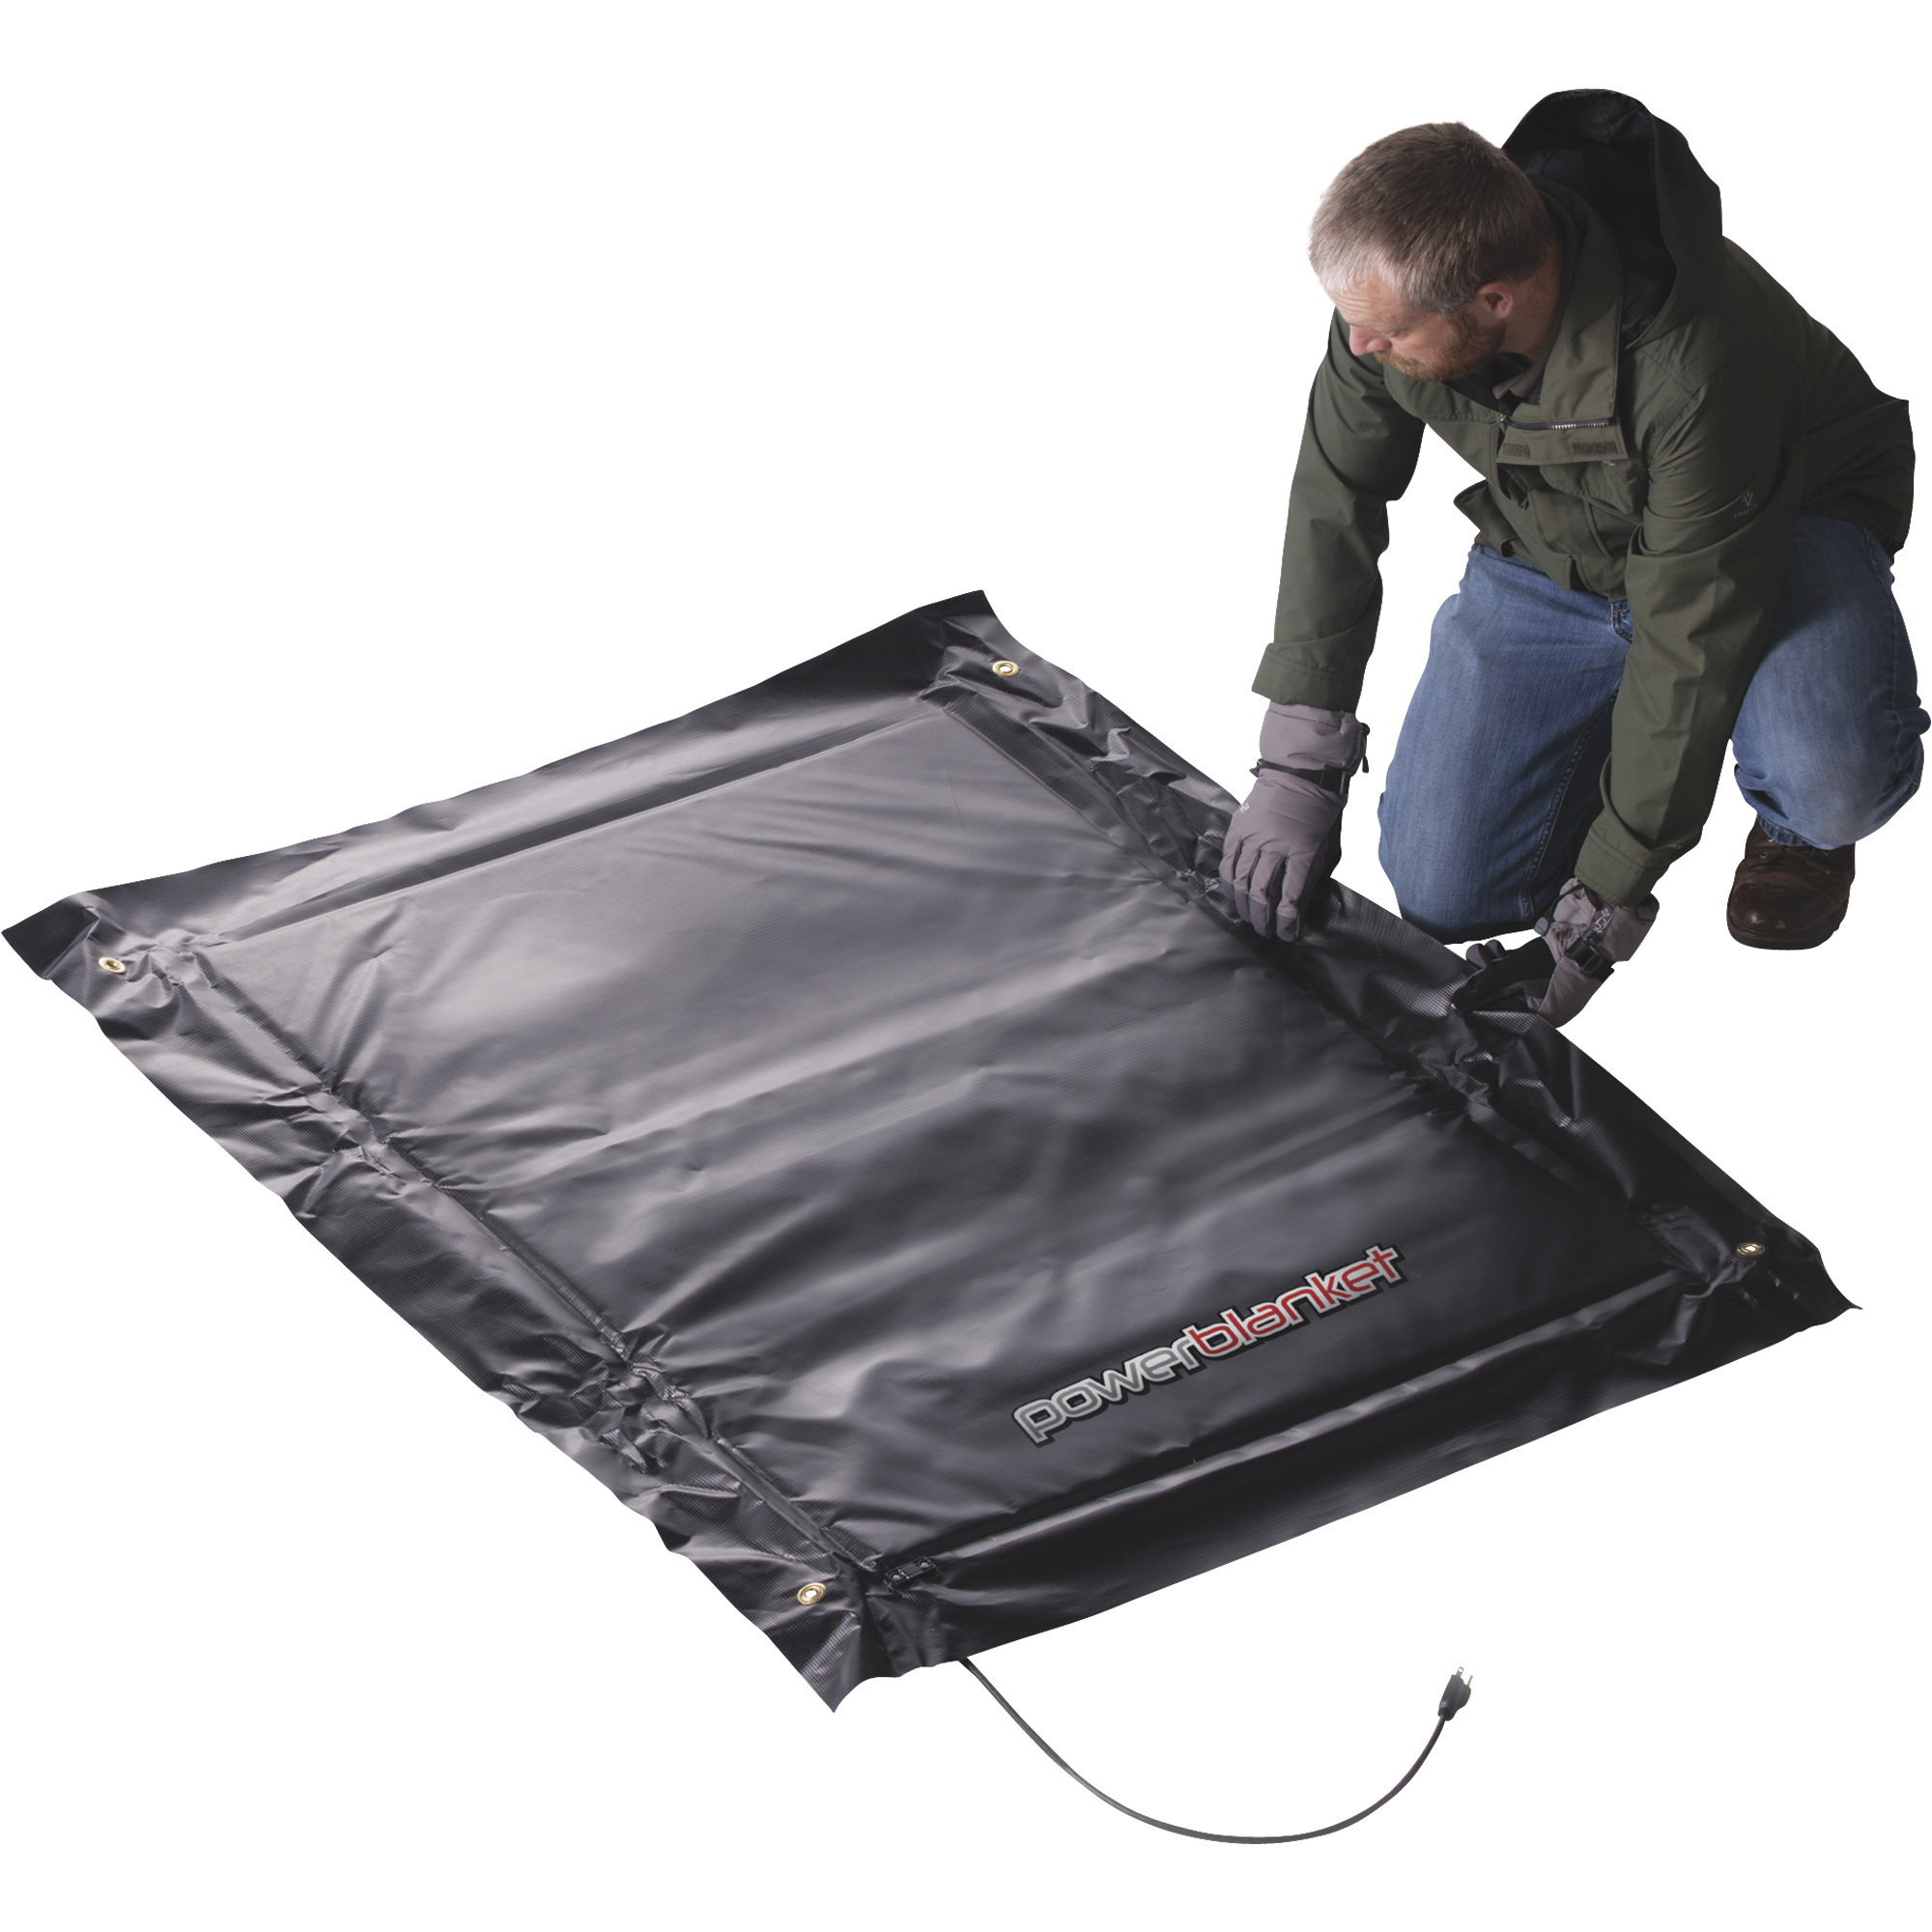 Powerblanket MD1010 Heated Concrete Blanket - 10' x 10' Heated Dimensions - 12' x 12' Finished Dimensions